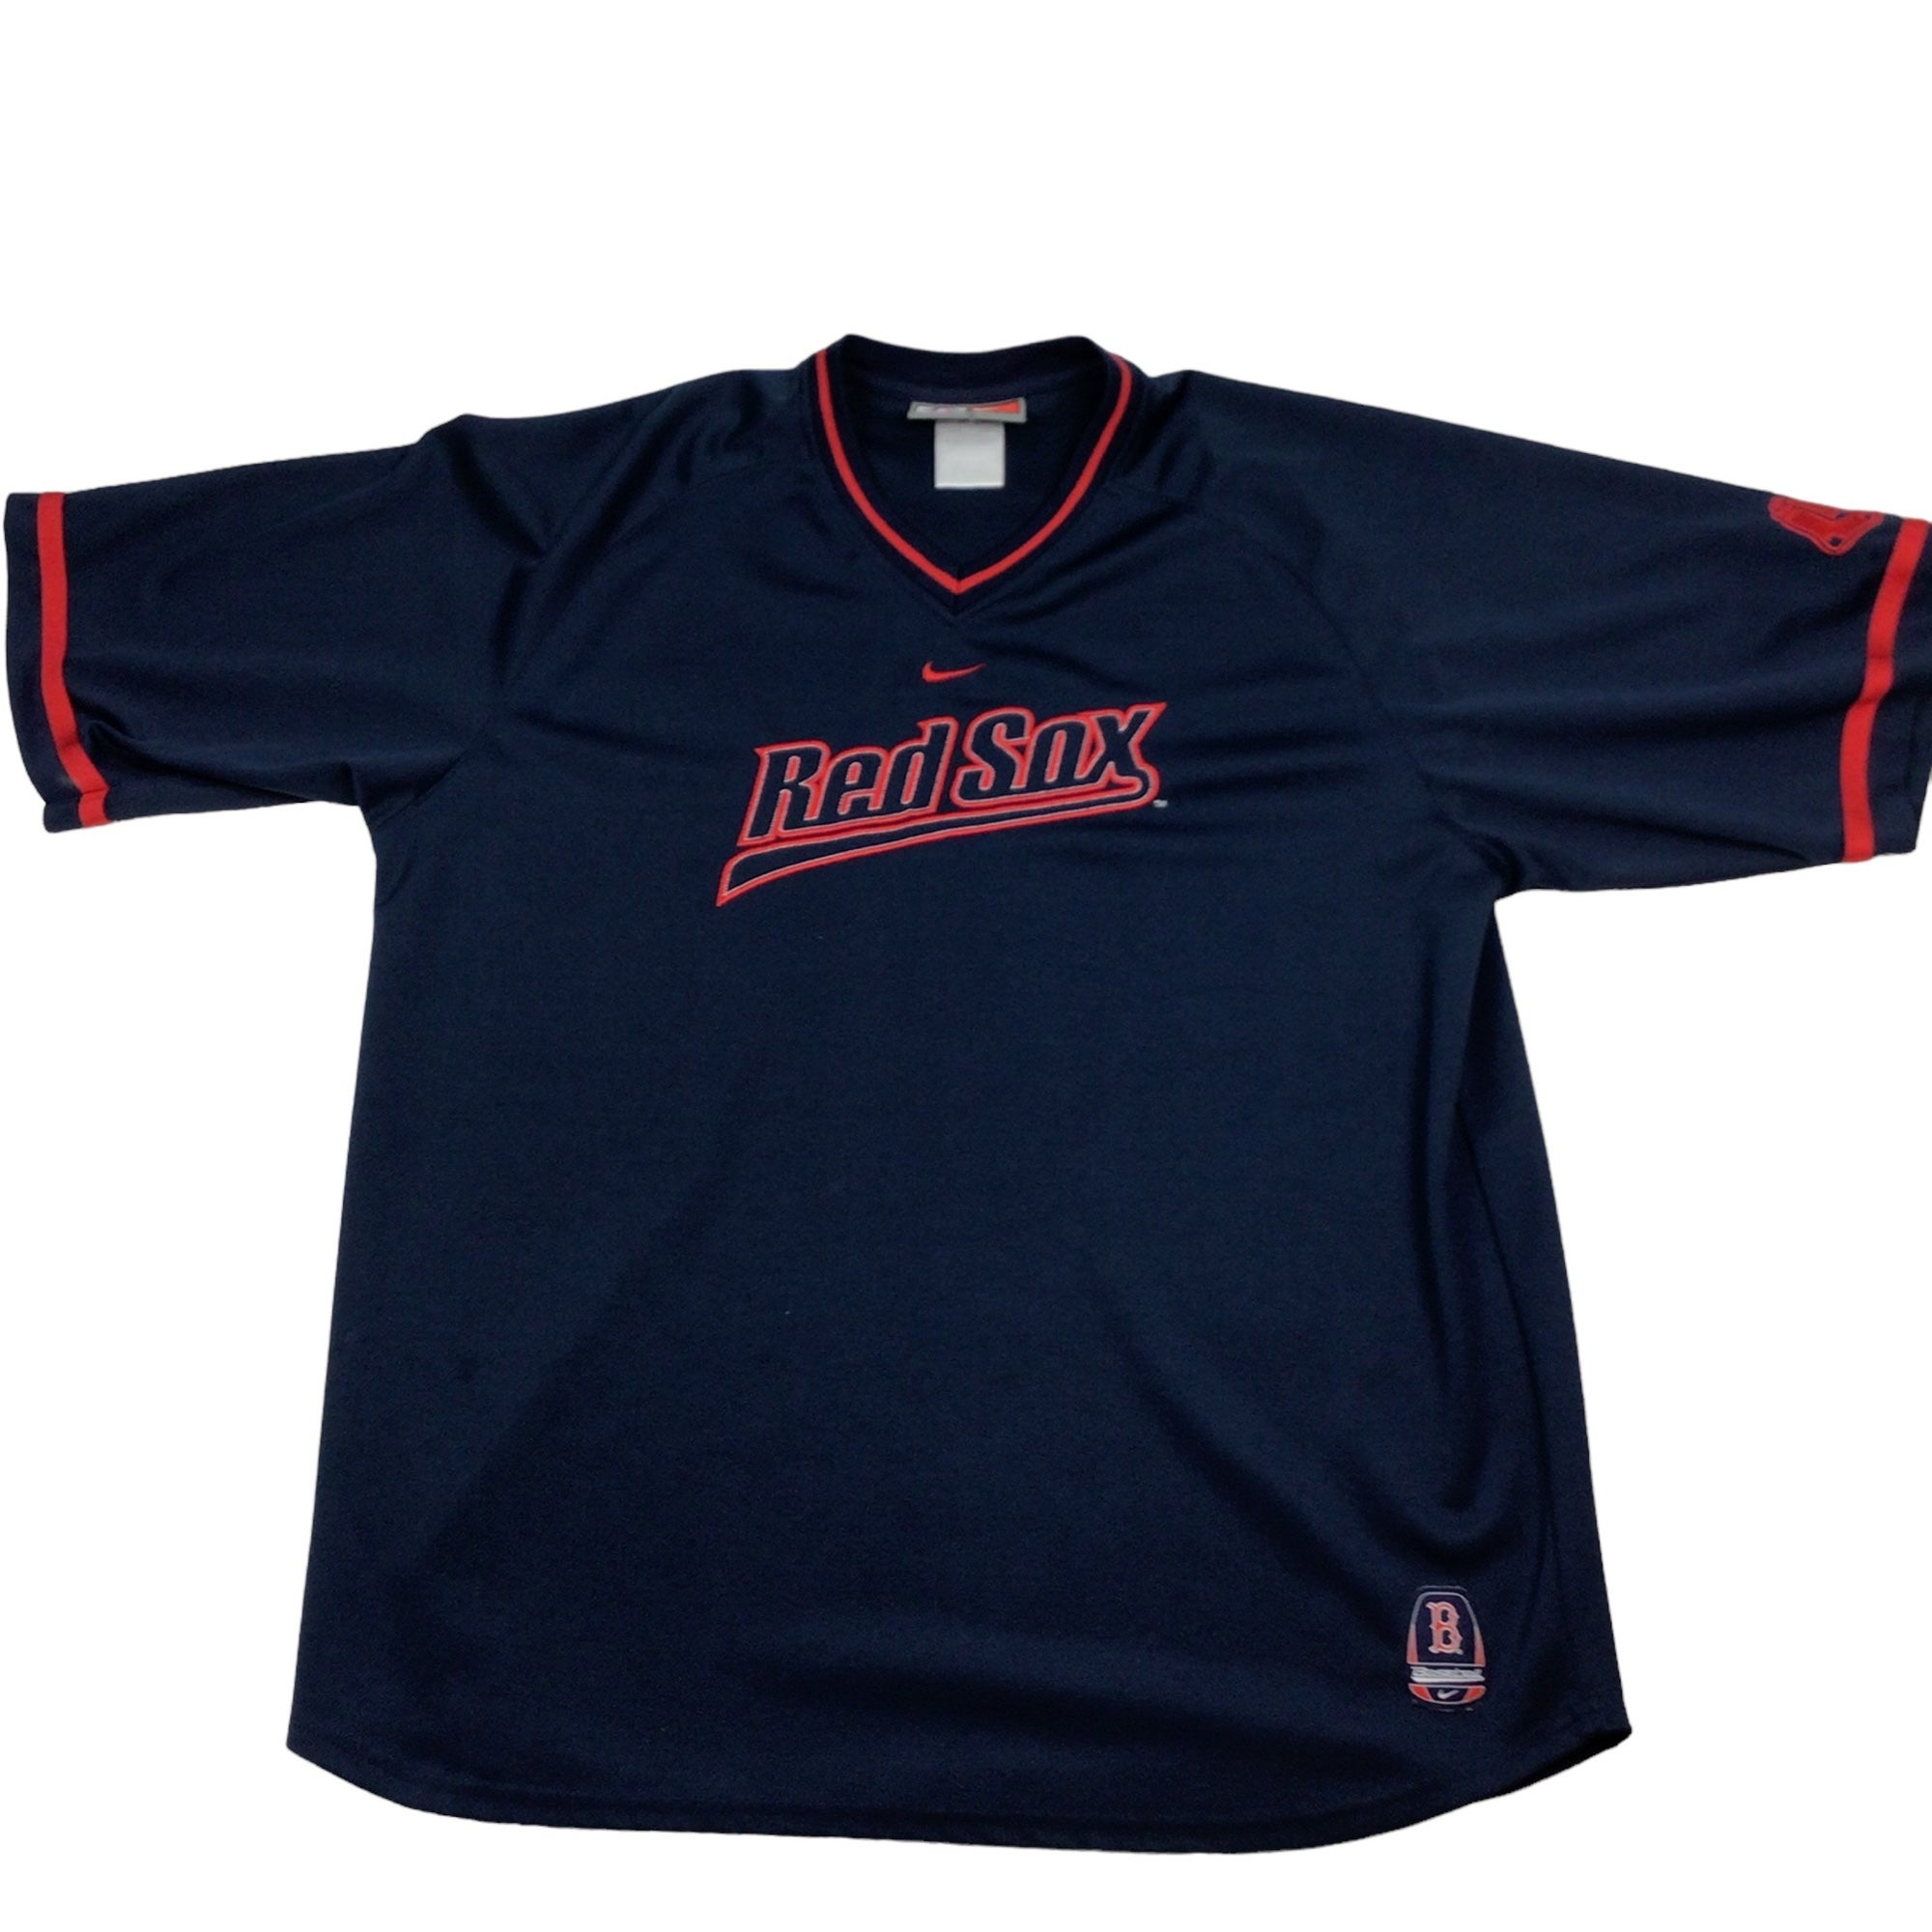 Vintage Nike Boston Red Sox MLB pullover Nike jersey. 90s Stitched logo.  High quality. 2XL